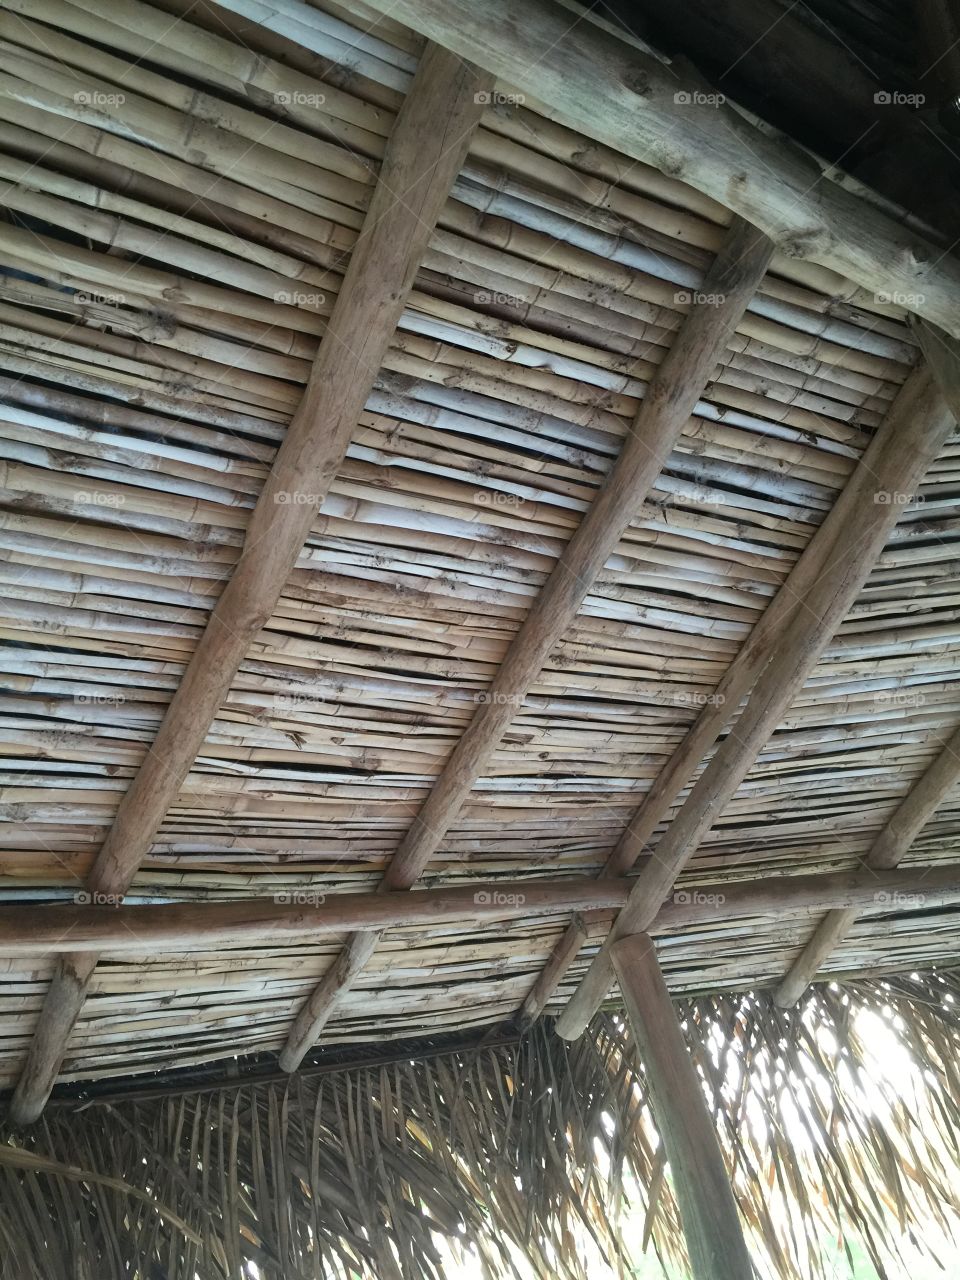 Stick structure interior roof pattern